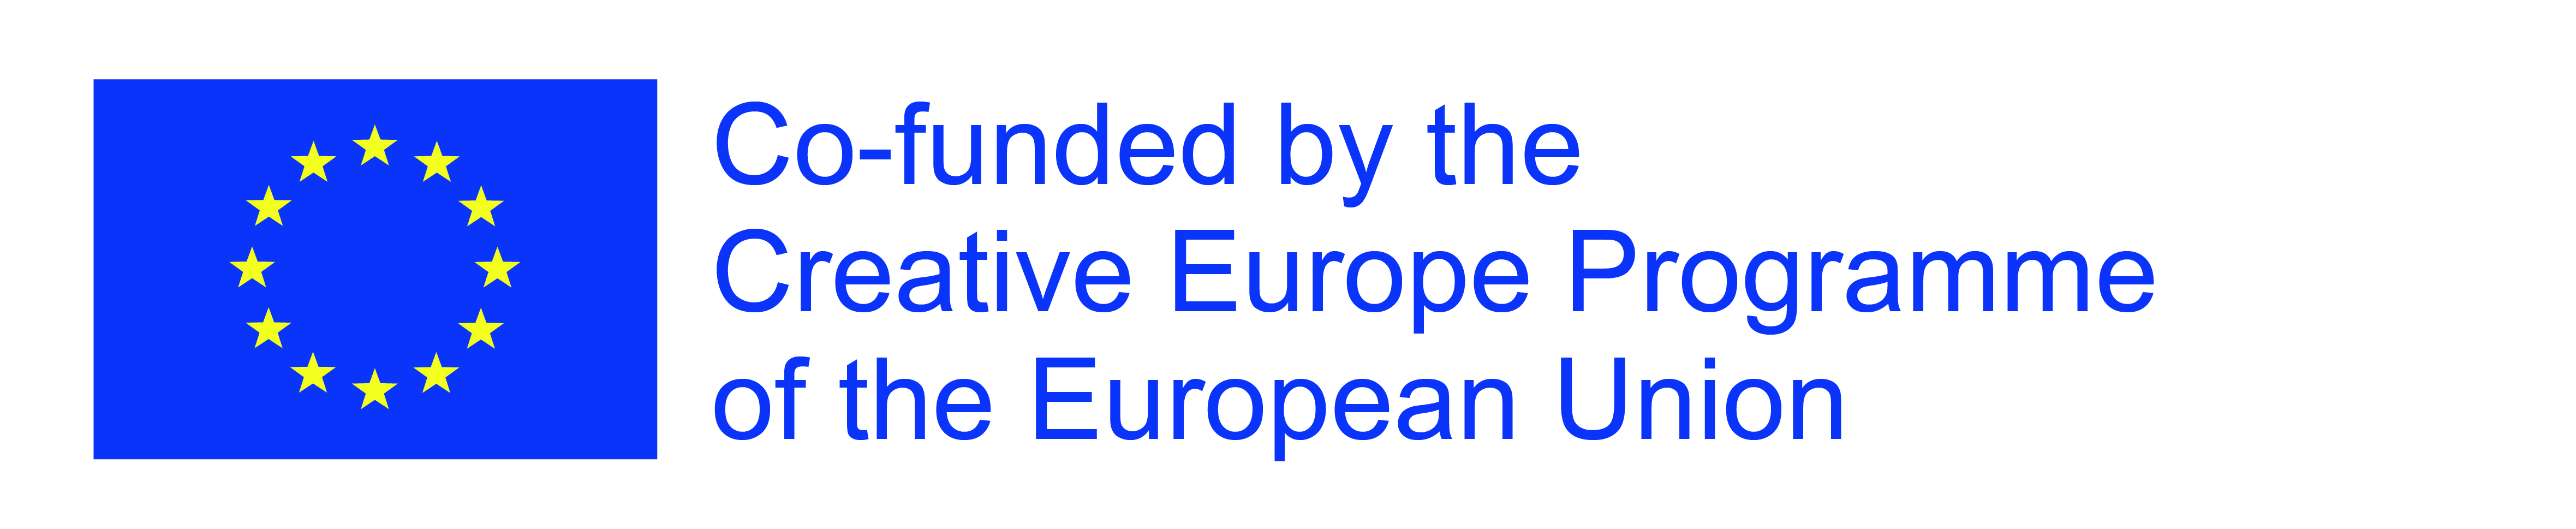 Co-funded by the Creative Europe Programme of the European Union.